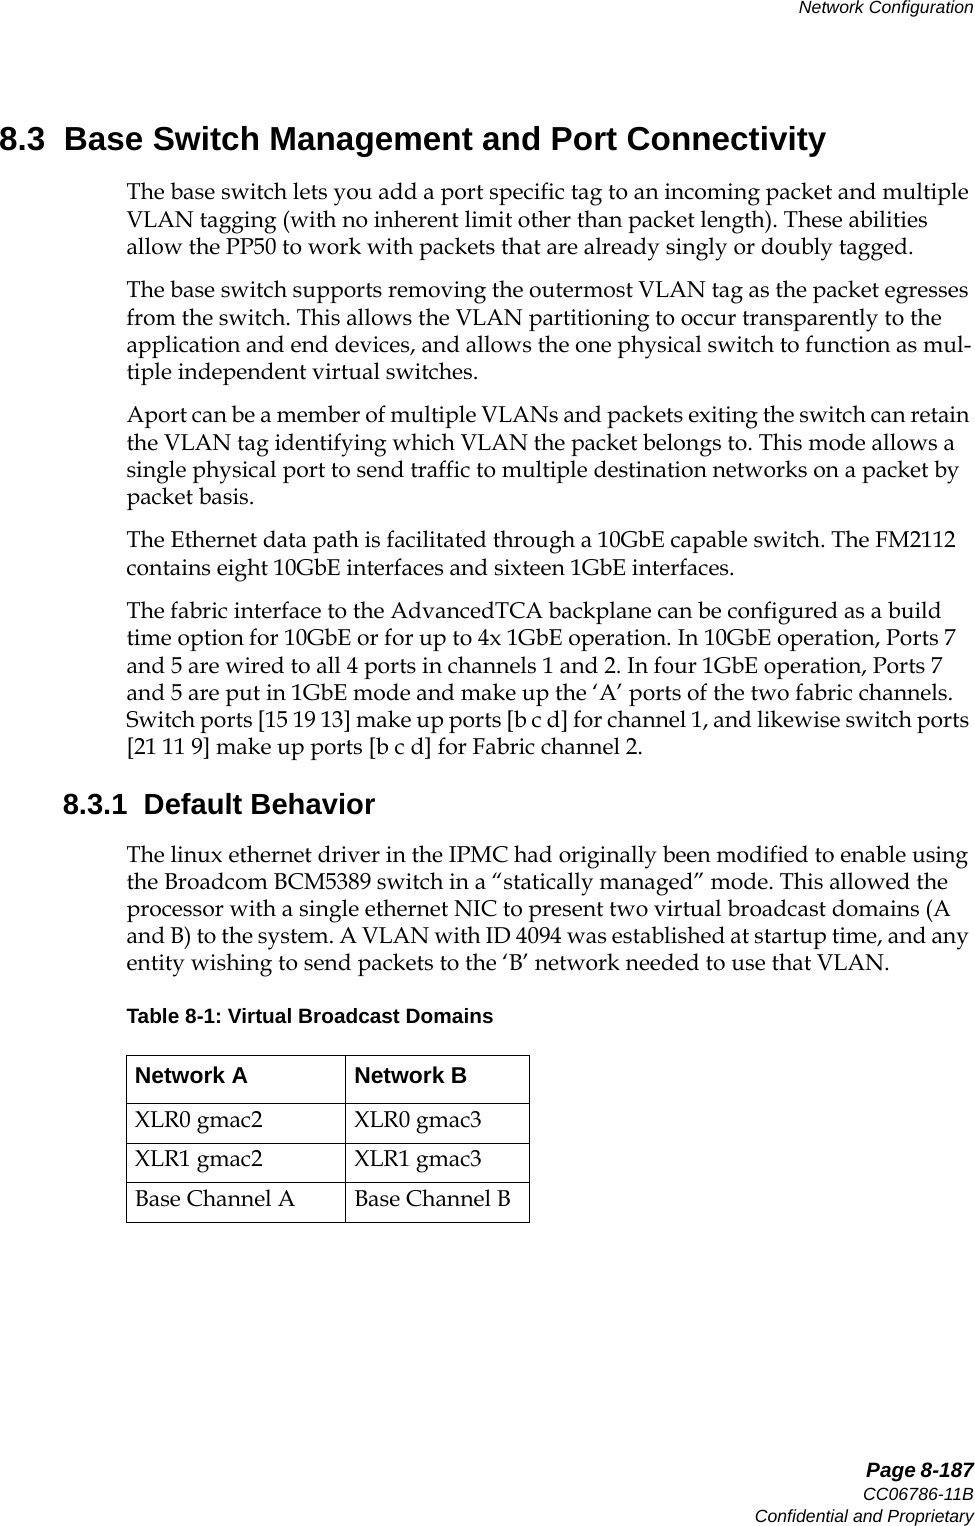   Page 8-187CC06786-11BConfidential and ProprietaryNetwork Configuration14ABABPreliminary8.3  Base Switch Management and Port Connectivity The base switch lets you add a port specific tag to an incoming packet and multiple VLAN tagging (with no inherent limit other than packet length). These abilities allow the PP50 to work with packets that are already singly or doubly tagged.The base switch supports removing the outermost VLAN tag as the packet egresses from the switch. This allows the VLAN partitioning to occur transparently to the application and end devices, and allows the one physical switch to function as mul-tiple independent virtual switches.Aport can be a member of multiple VLANs and packets exiting the switch can retain the VLAN tag identifying which VLAN the packet belongs to. This mode allows a single physical port to send traffic to multiple destination networks on a packet by packet basis.The Ethernet data path is facilitated through a 10GbE capable switch. The FM2112 contains eight 10GbE interfaces and sixteen 1GbE interfaces.The fabric interface to the AdvancedTCA backplane can be configured as a build time option for 10GbE or for up to 4x 1GbE operation. In 10GbE operation, Ports 7 and 5 are wired to all 4 ports in channels 1 and 2. In four 1GbE operation, Ports 7 and 5 are put in 1GbE mode and make up the ‘A’ ports of the two fabric channels. Switch ports [15 19 13] make up ports [b c d] for channel 1, and likewise switch ports [21 11 9] make up ports [b c d] for Fabric channel 2.8.3.1  Default BehaviorThe linux ethernet driver in the IPMC had originally been modified to enable using the Broadcom BCM5389 switch in a “statically managed” mode. This allowed the processor with a single ethernet NIC to present two virtual broadcast domains (A and B) to the system. A VLAN with ID 4094 was established at startup time, and any entity wishing to send packets to the ‘B’ network needed to use that VLAN. Table 8-1: Virtual Broadcast DomainsNetwork A Network BXLR0 gmac2 XLR0 gmac3XLR1 gmac2 XLR1 gmac3Base Channel A Base Channel B